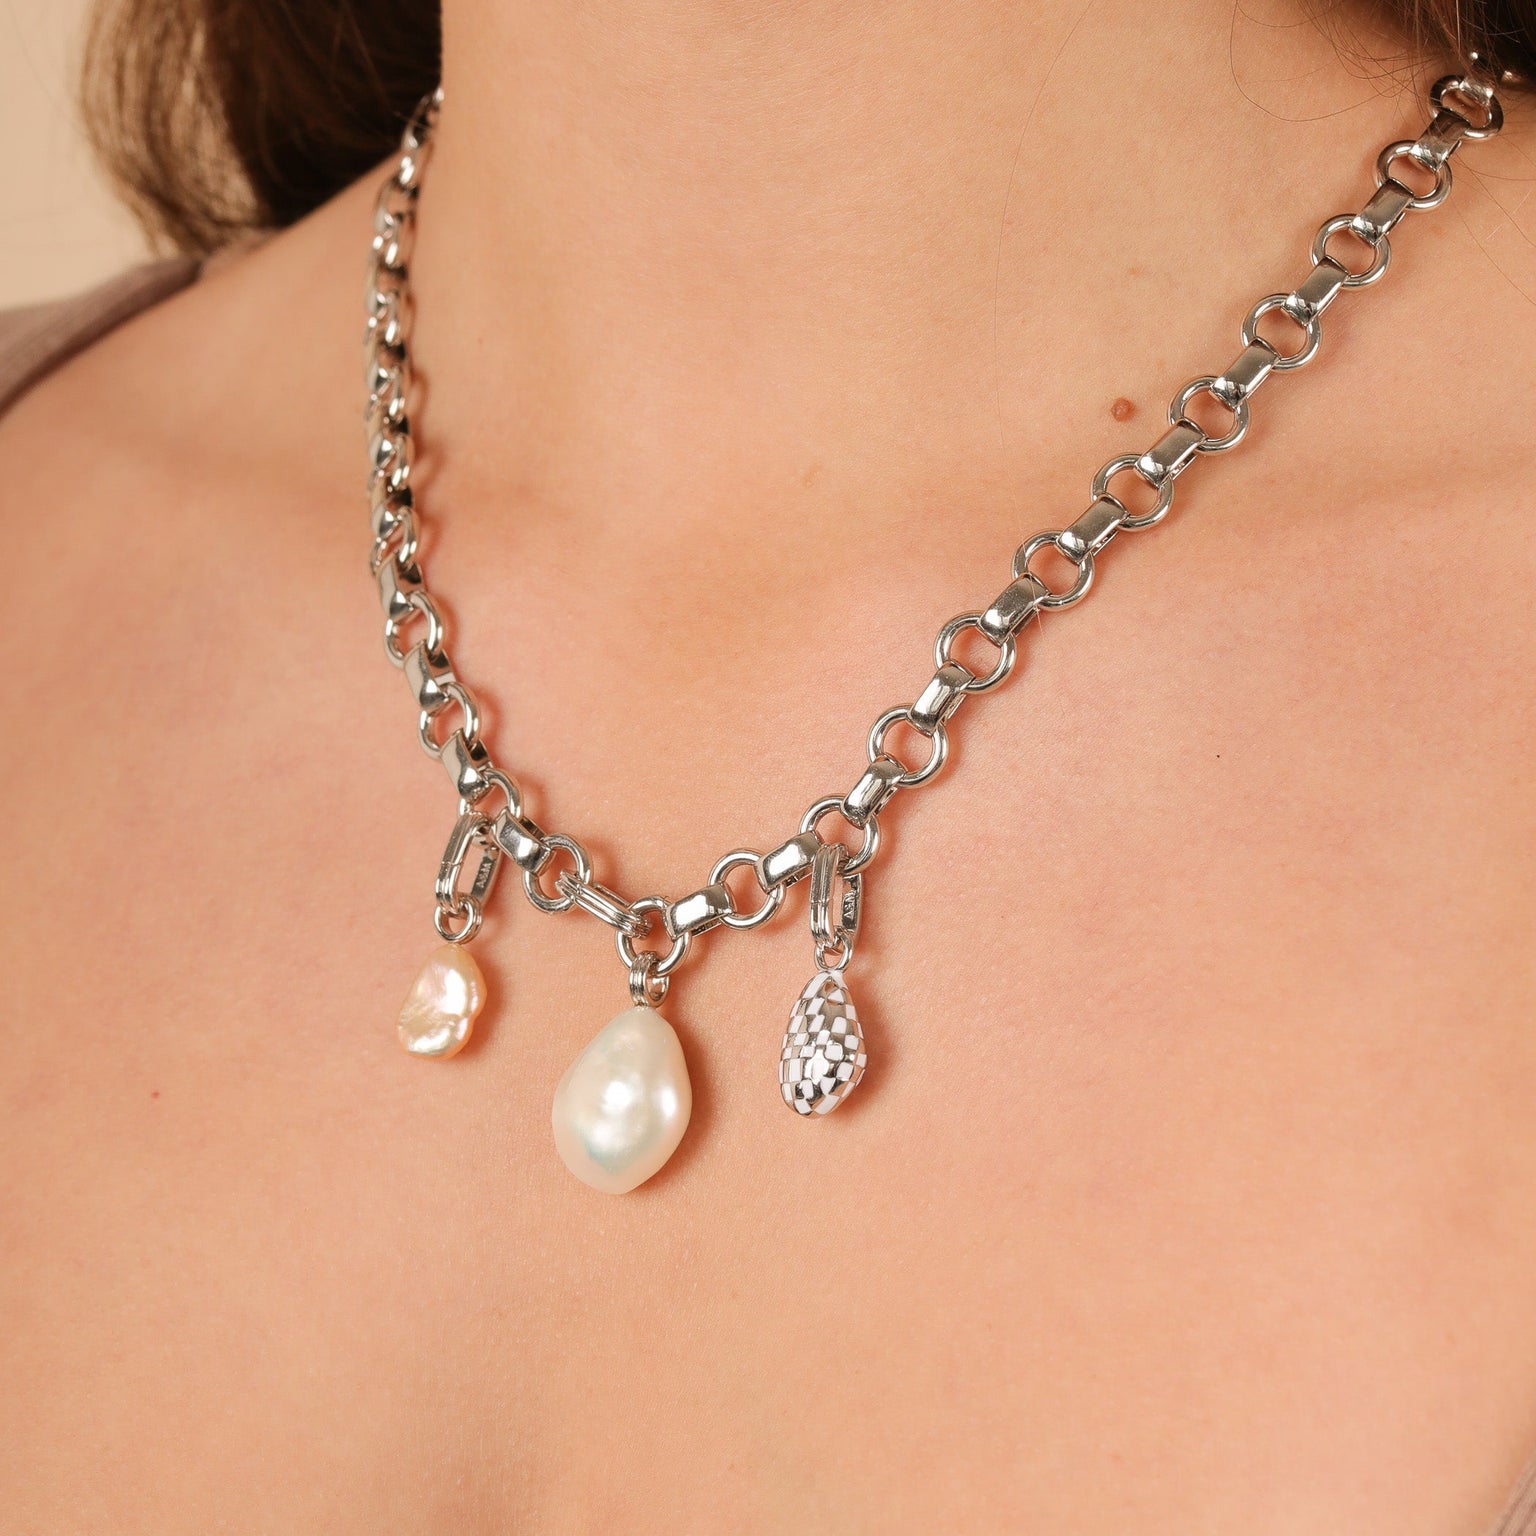 Serenity Pearl Link Chain Necklace in Silver